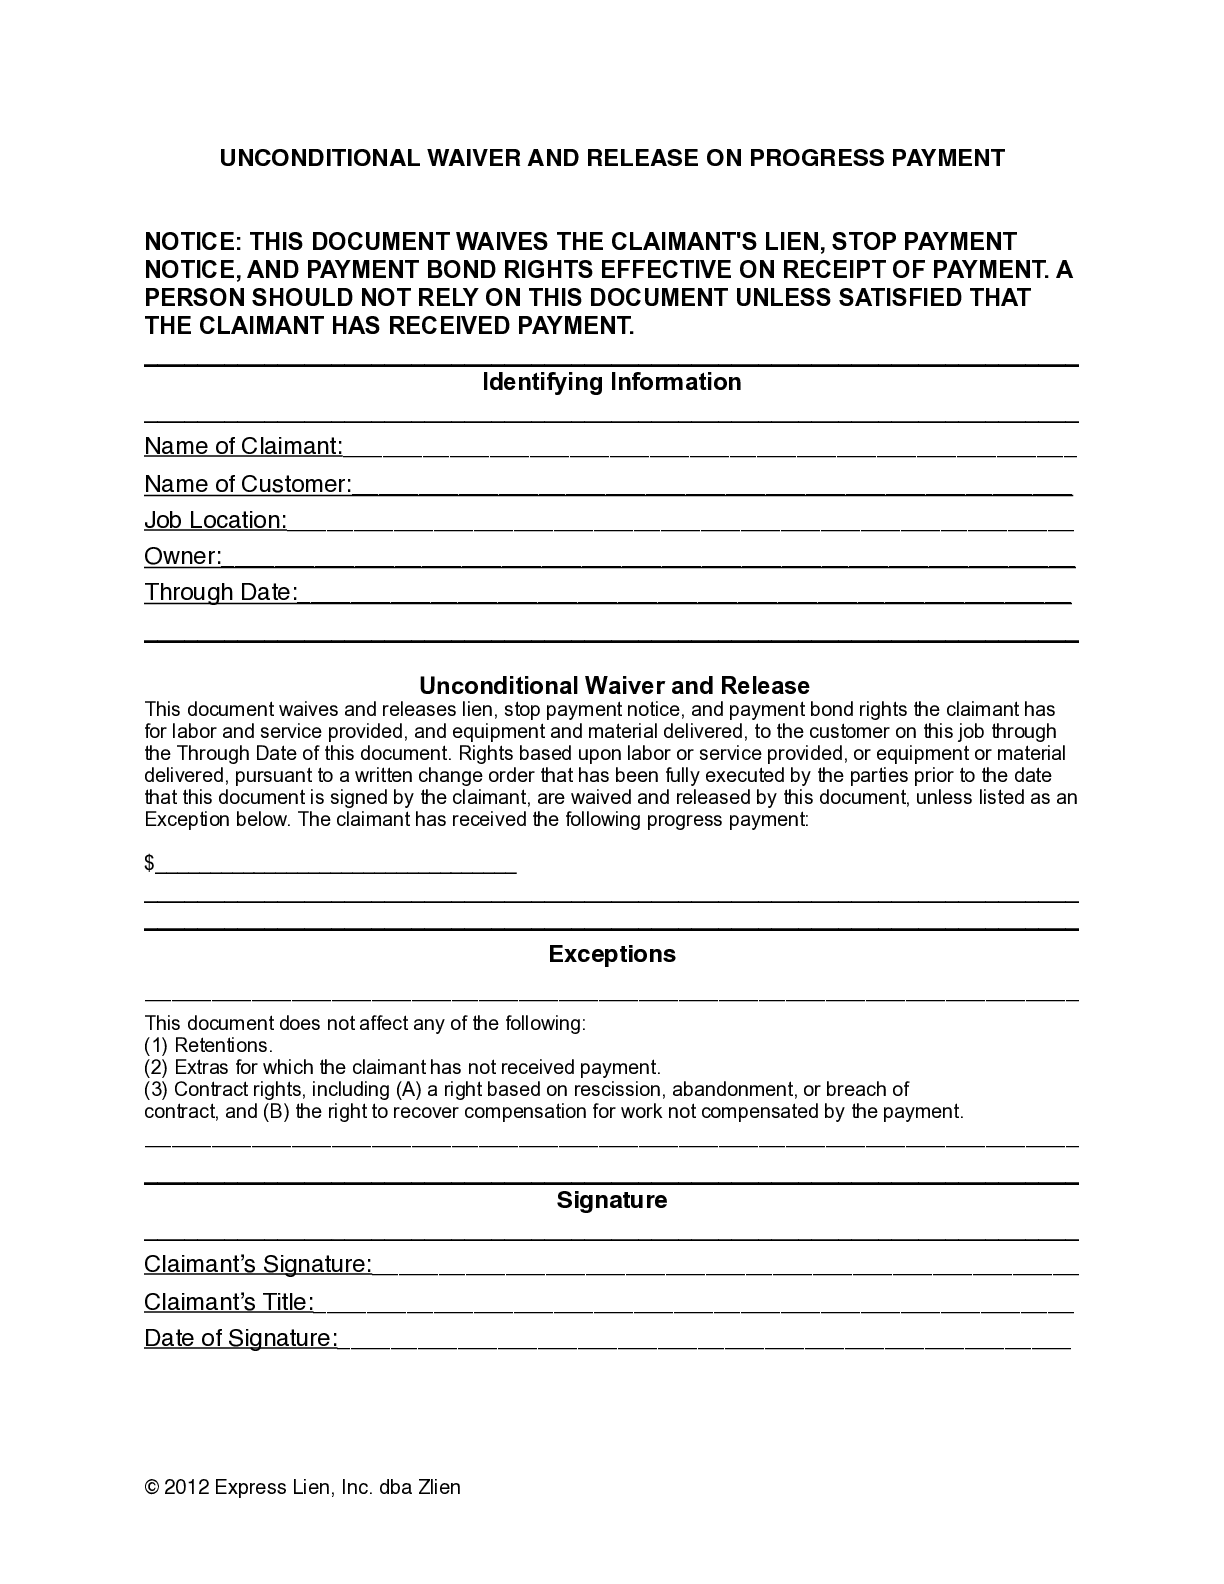 Indiana Partial Unconditional Lien Waiver Form - free from